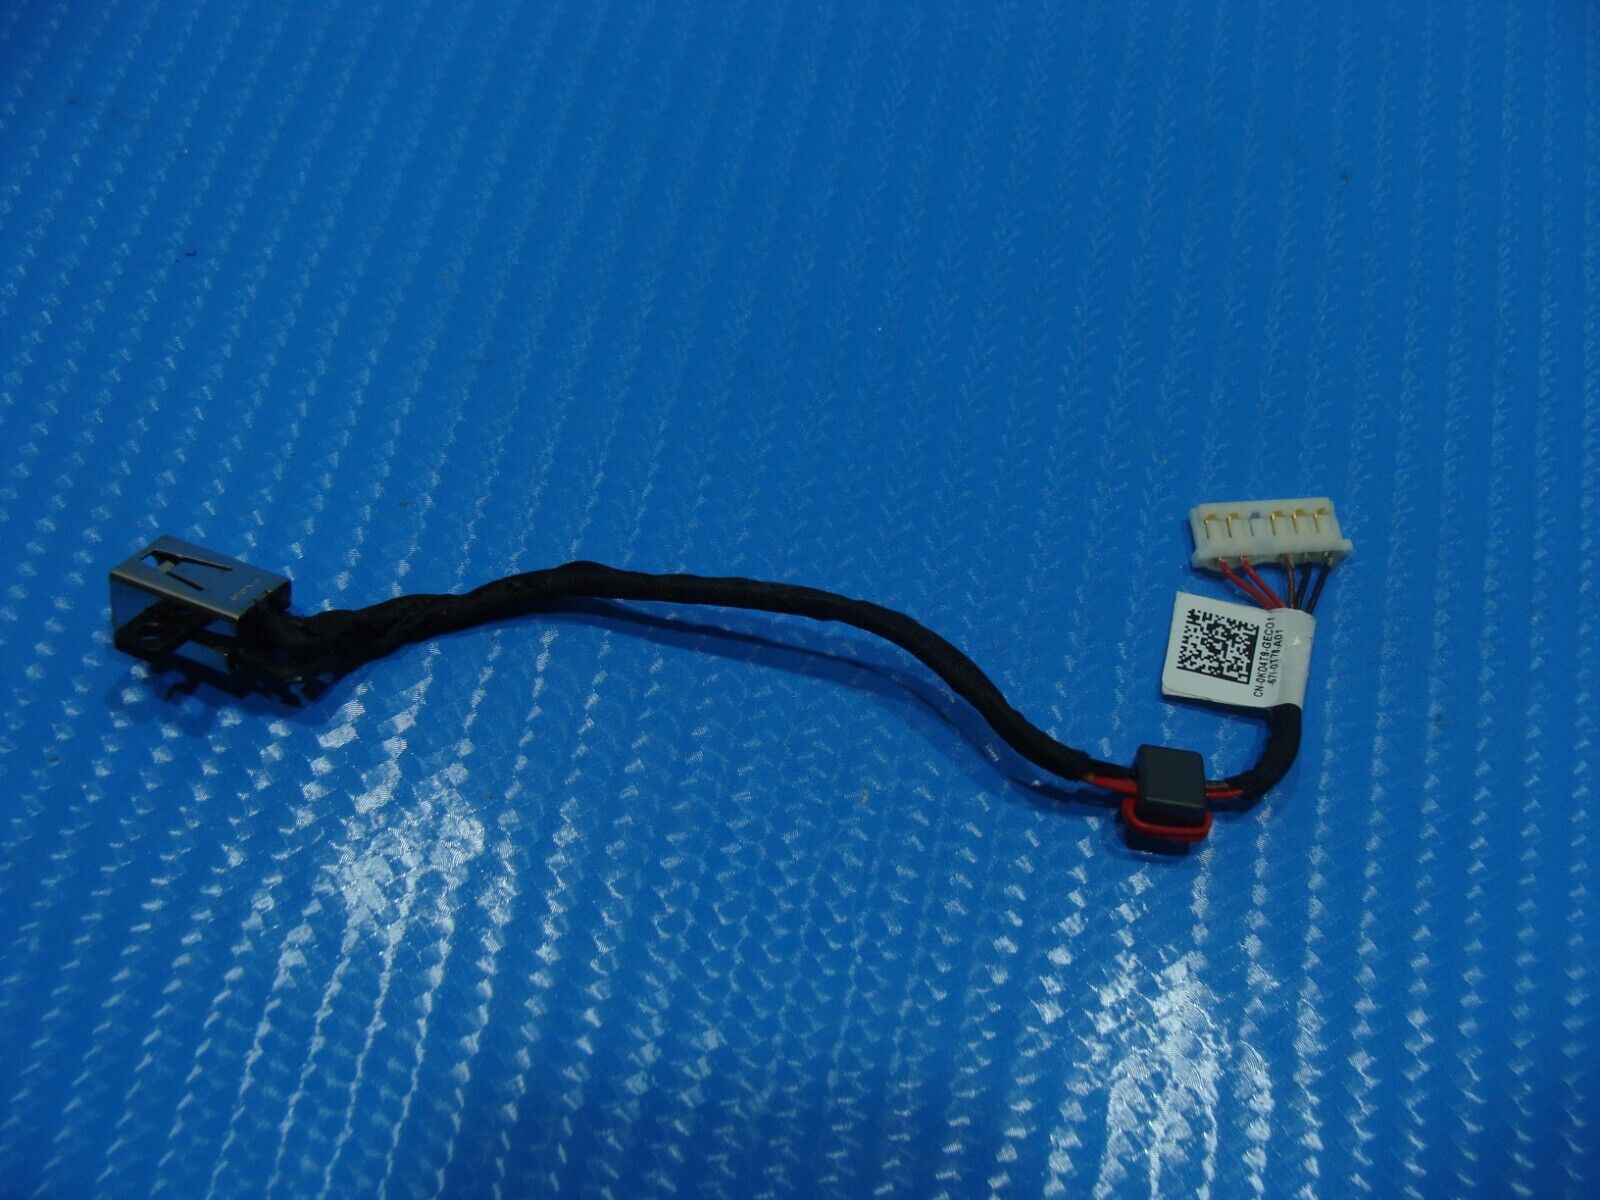 Dell Inspiron 15.6” 15 5559 Genuine DC IN Power Jack w/Cable KD4T9 DC30100VV00